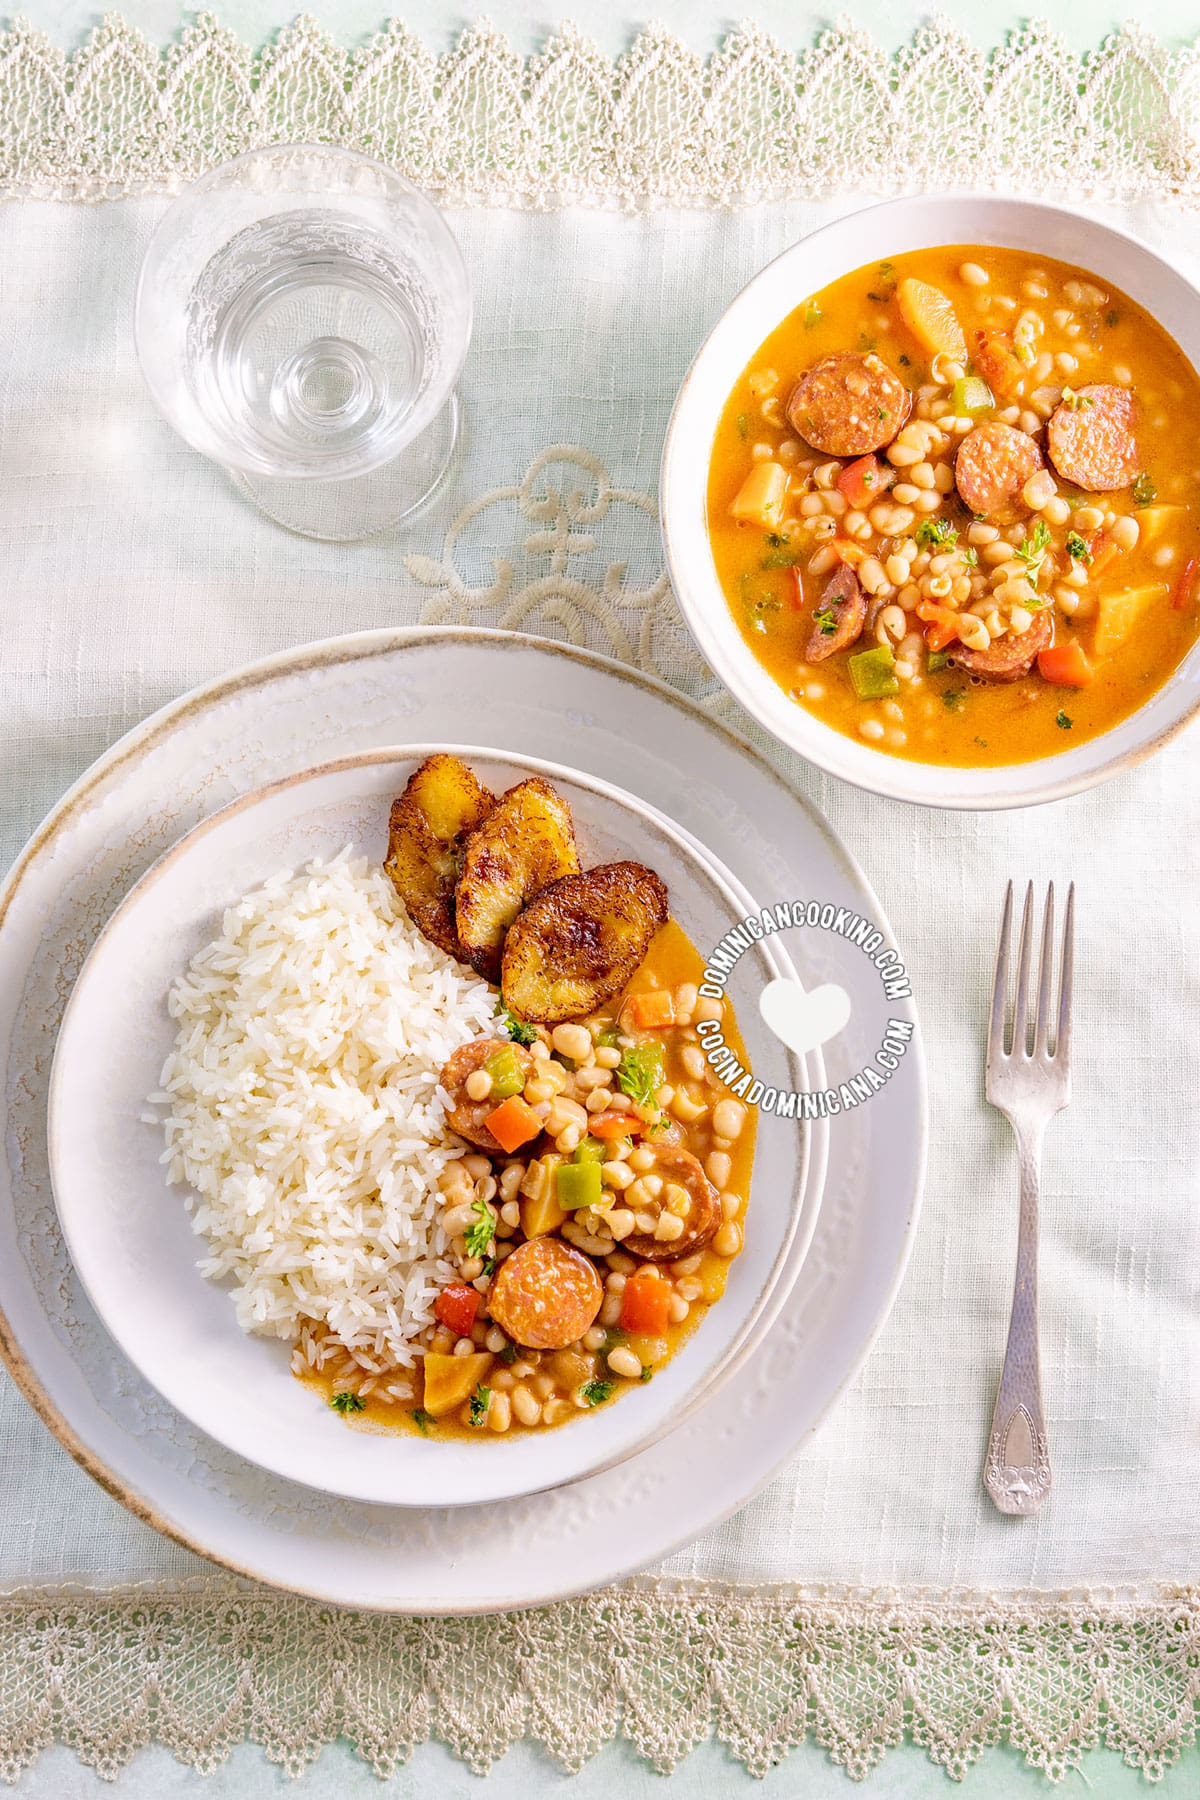 Habichuelas blancas guisadas (stewed small white beans) with rice and plantains.